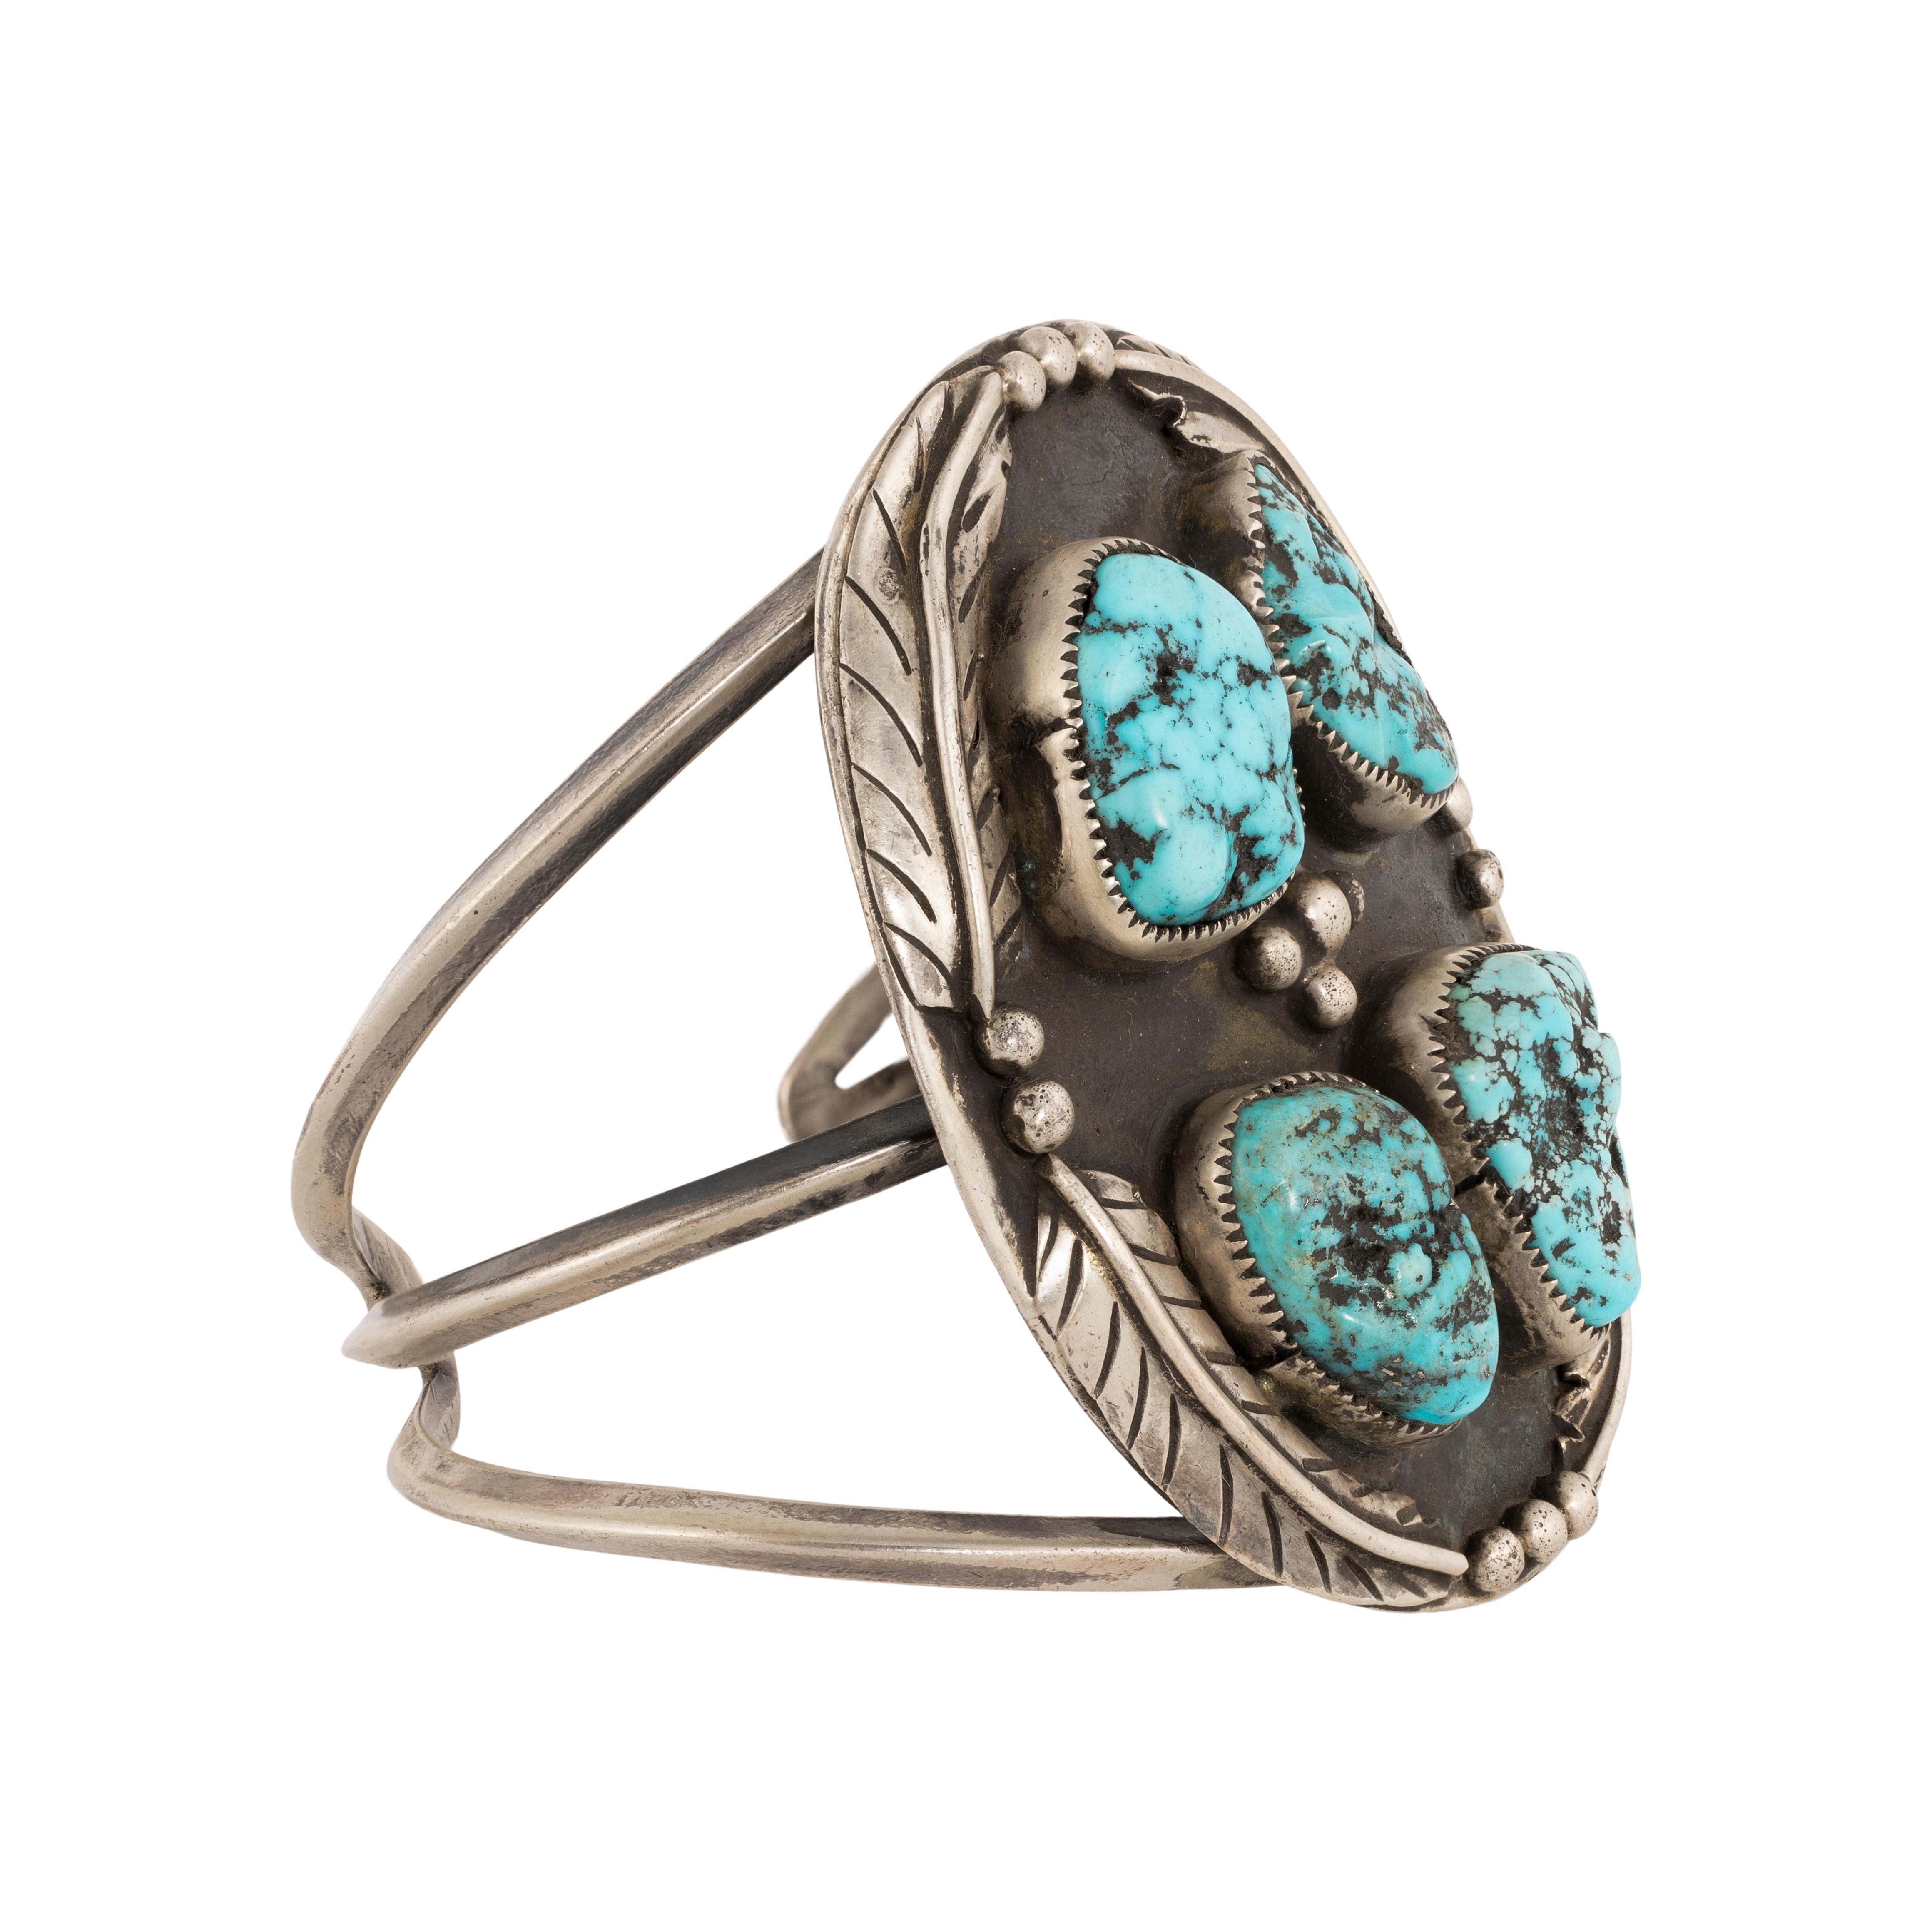 Navajo Kingman turquoise bracelet. Four raised stones in shadow box designs surrounded by leaves and beads. Three thin bands molded into one. Heavy patina that can be buffed out easily to make shiny. Flexible enough to adjust to wrist. Great patina